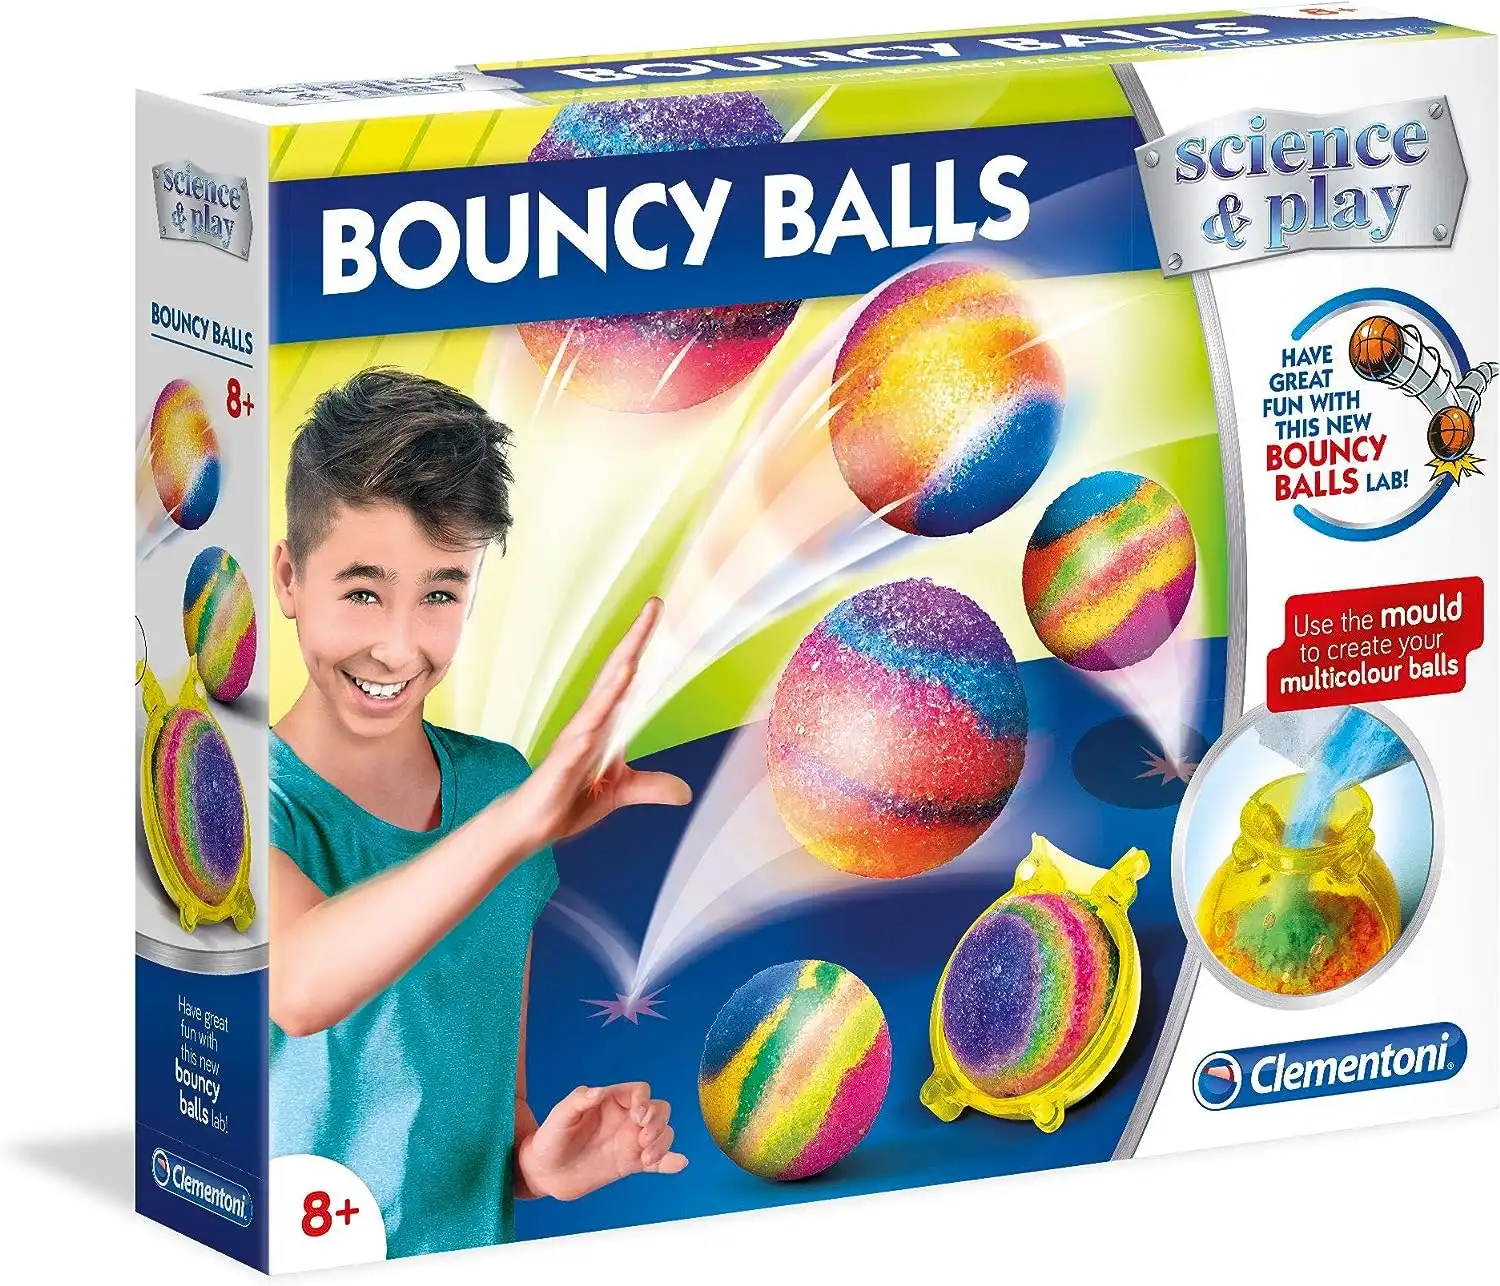 Clementoni Science and Play Bouncy Balls